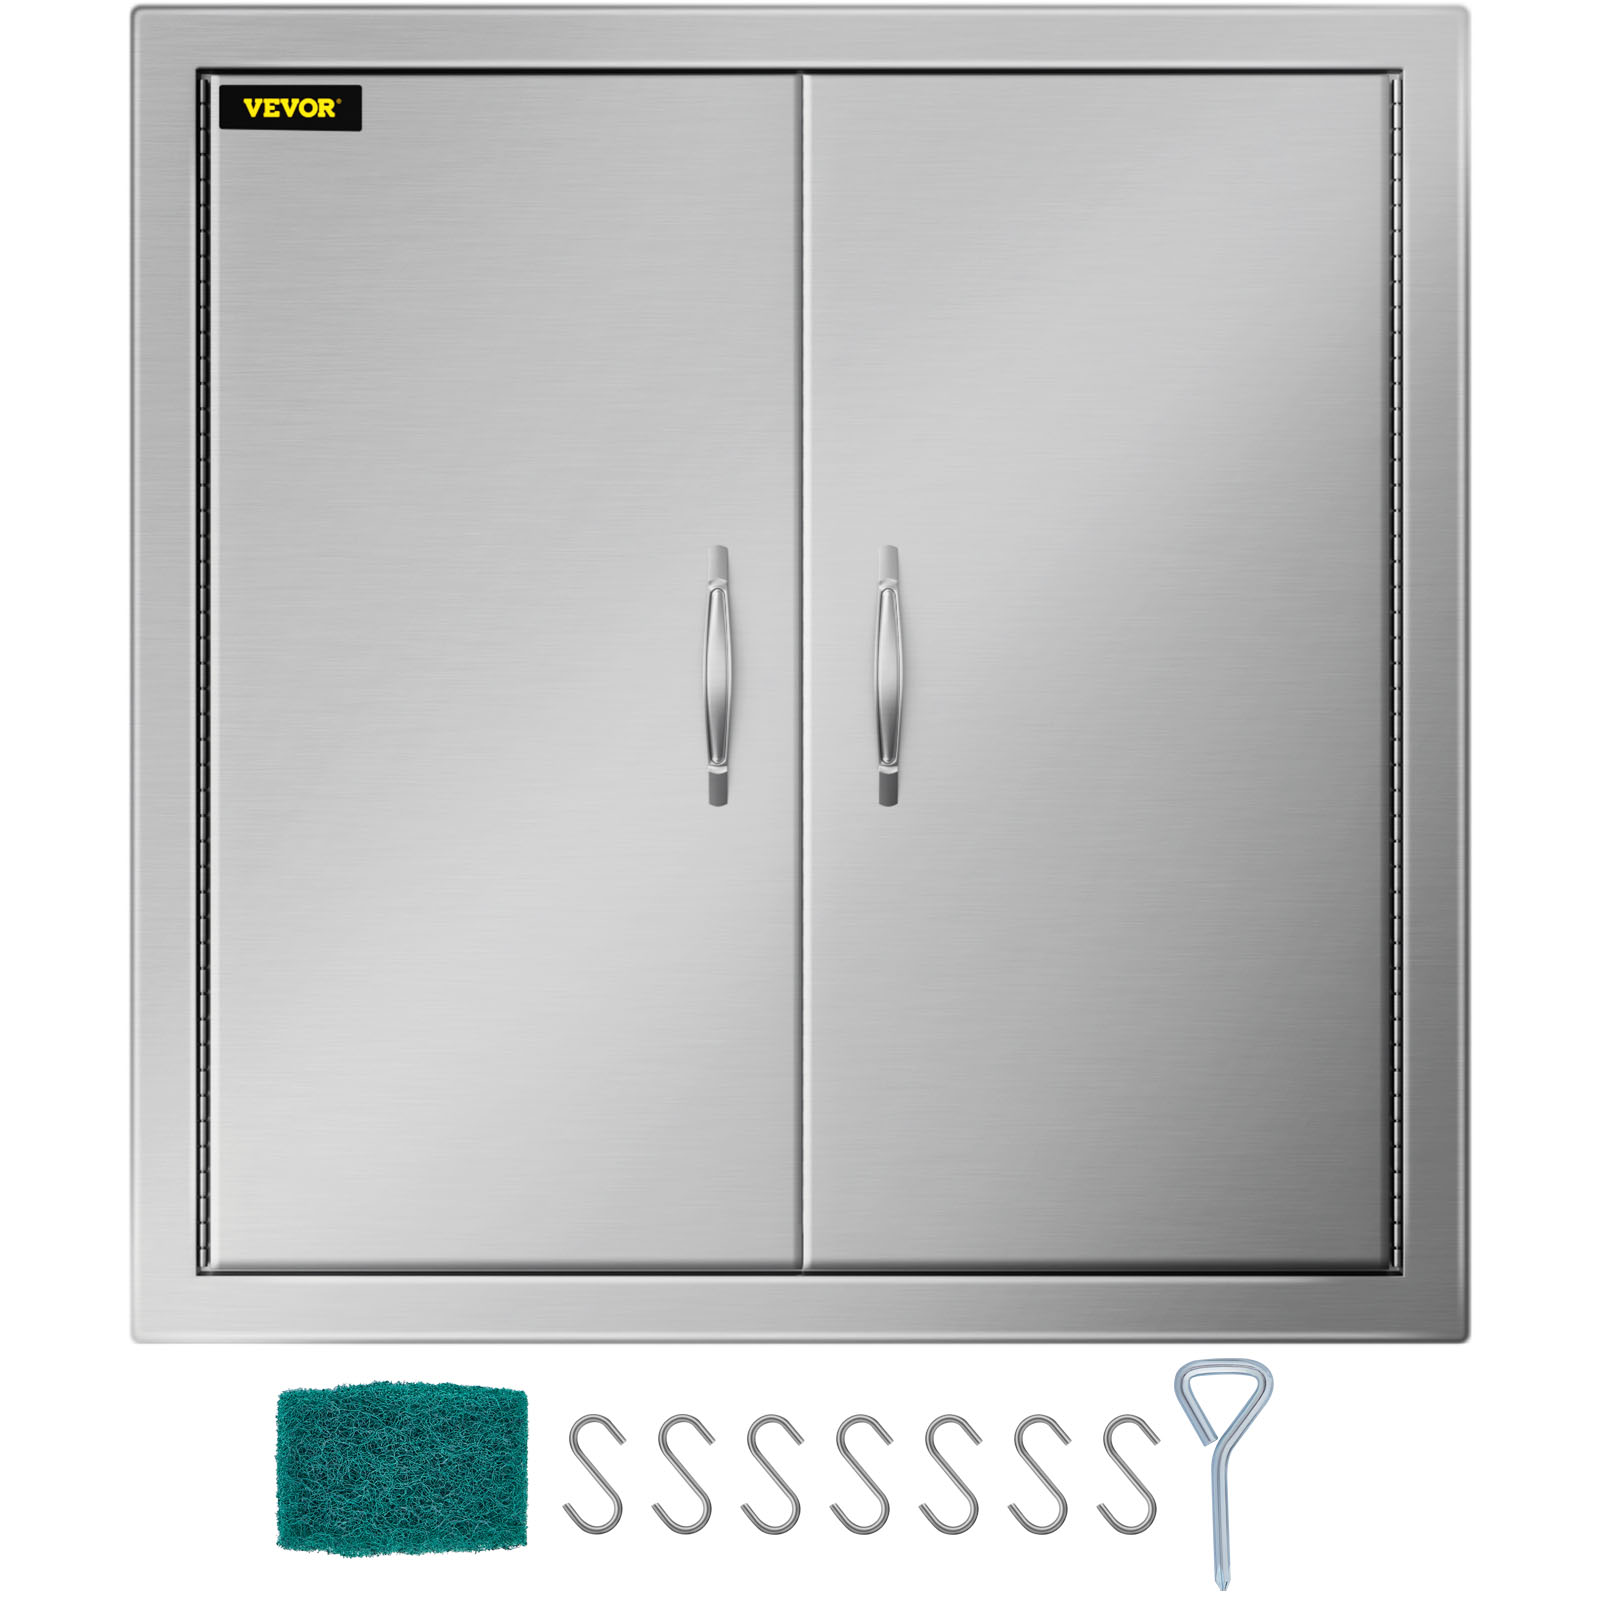 Weanas Access Door Outdoor Kitchen BBQ Access Door 17x 24 Vertical Single Wall Construction with 304 Grade Stainless Steel Perfect for Outdoor Kitchen or BBQ Island 17 W×24 H Single Wall 